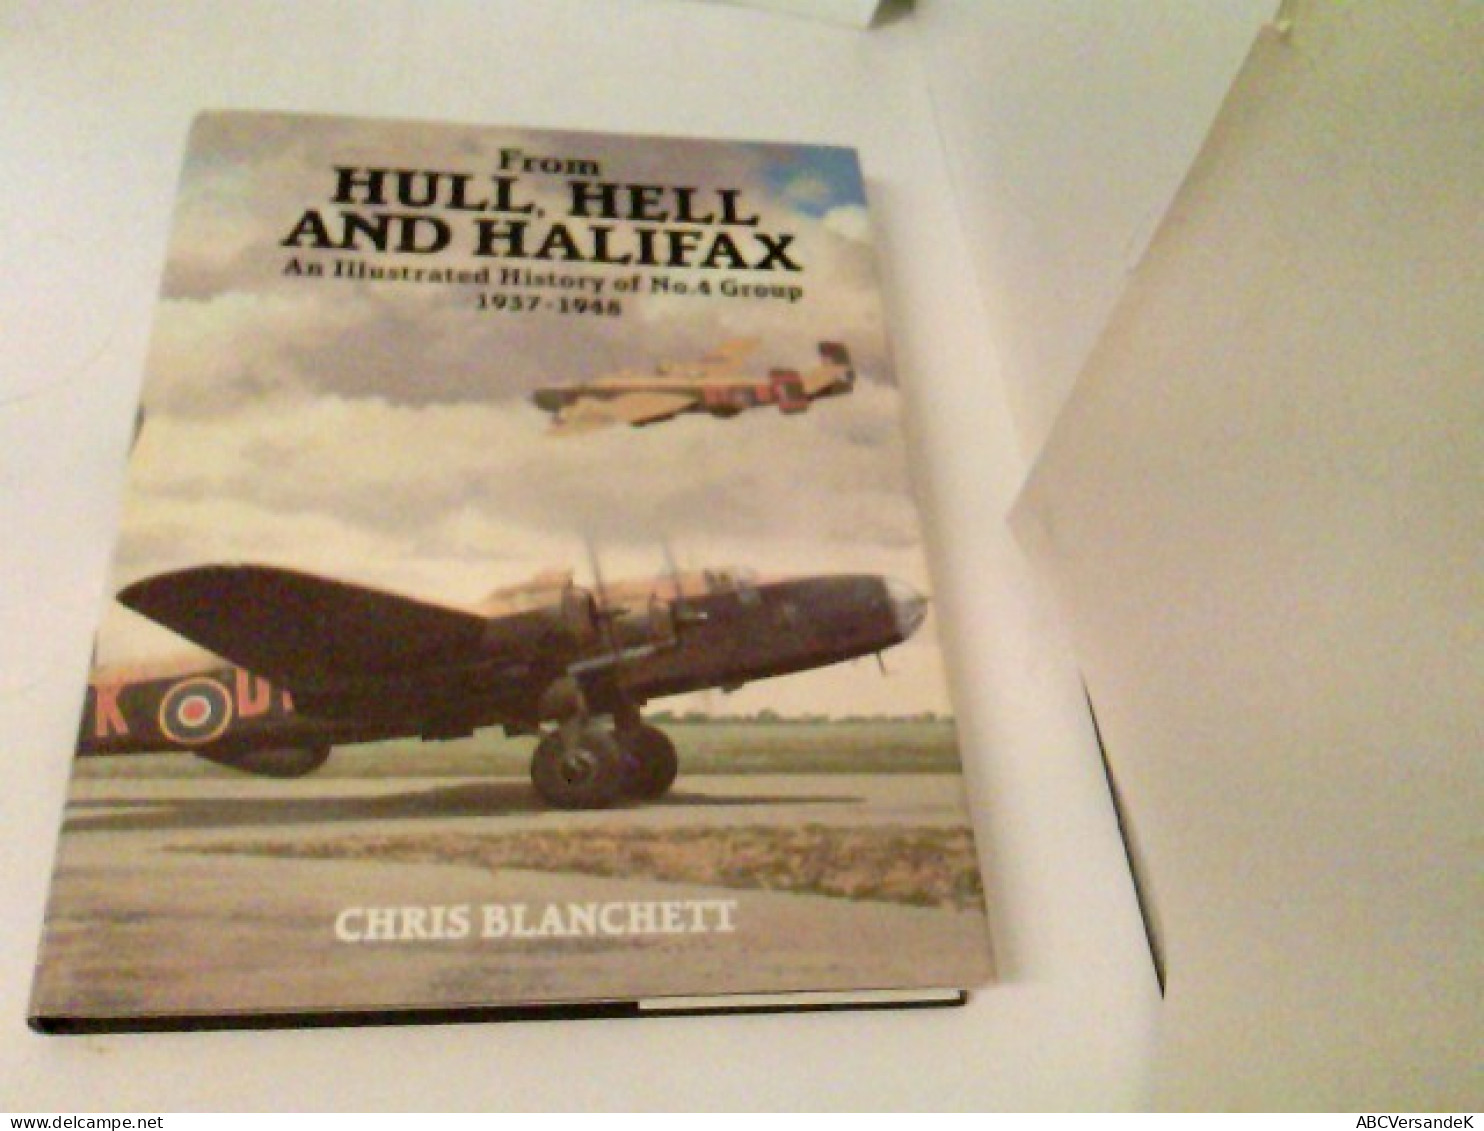 From Hull, Hell And Halifax: An Illustrated History Of No. 4 Group 1937-1948 - Trasporti